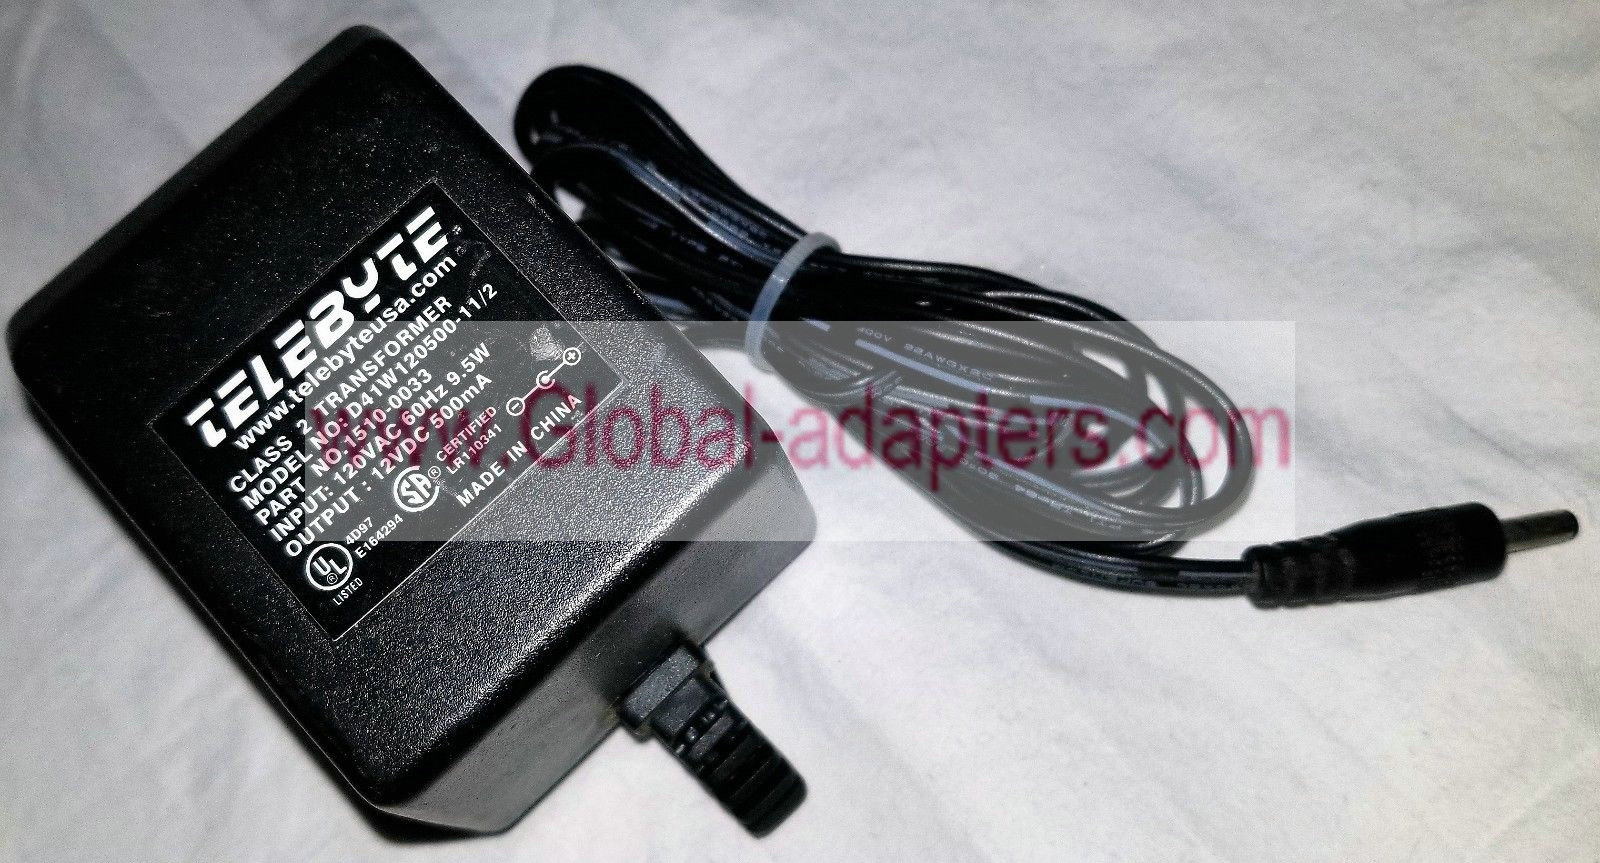 New Telebyte 12V 500mA D41W120500-11/2 1510-0033 AC DC Adapter Charger Class 2 Power Supply